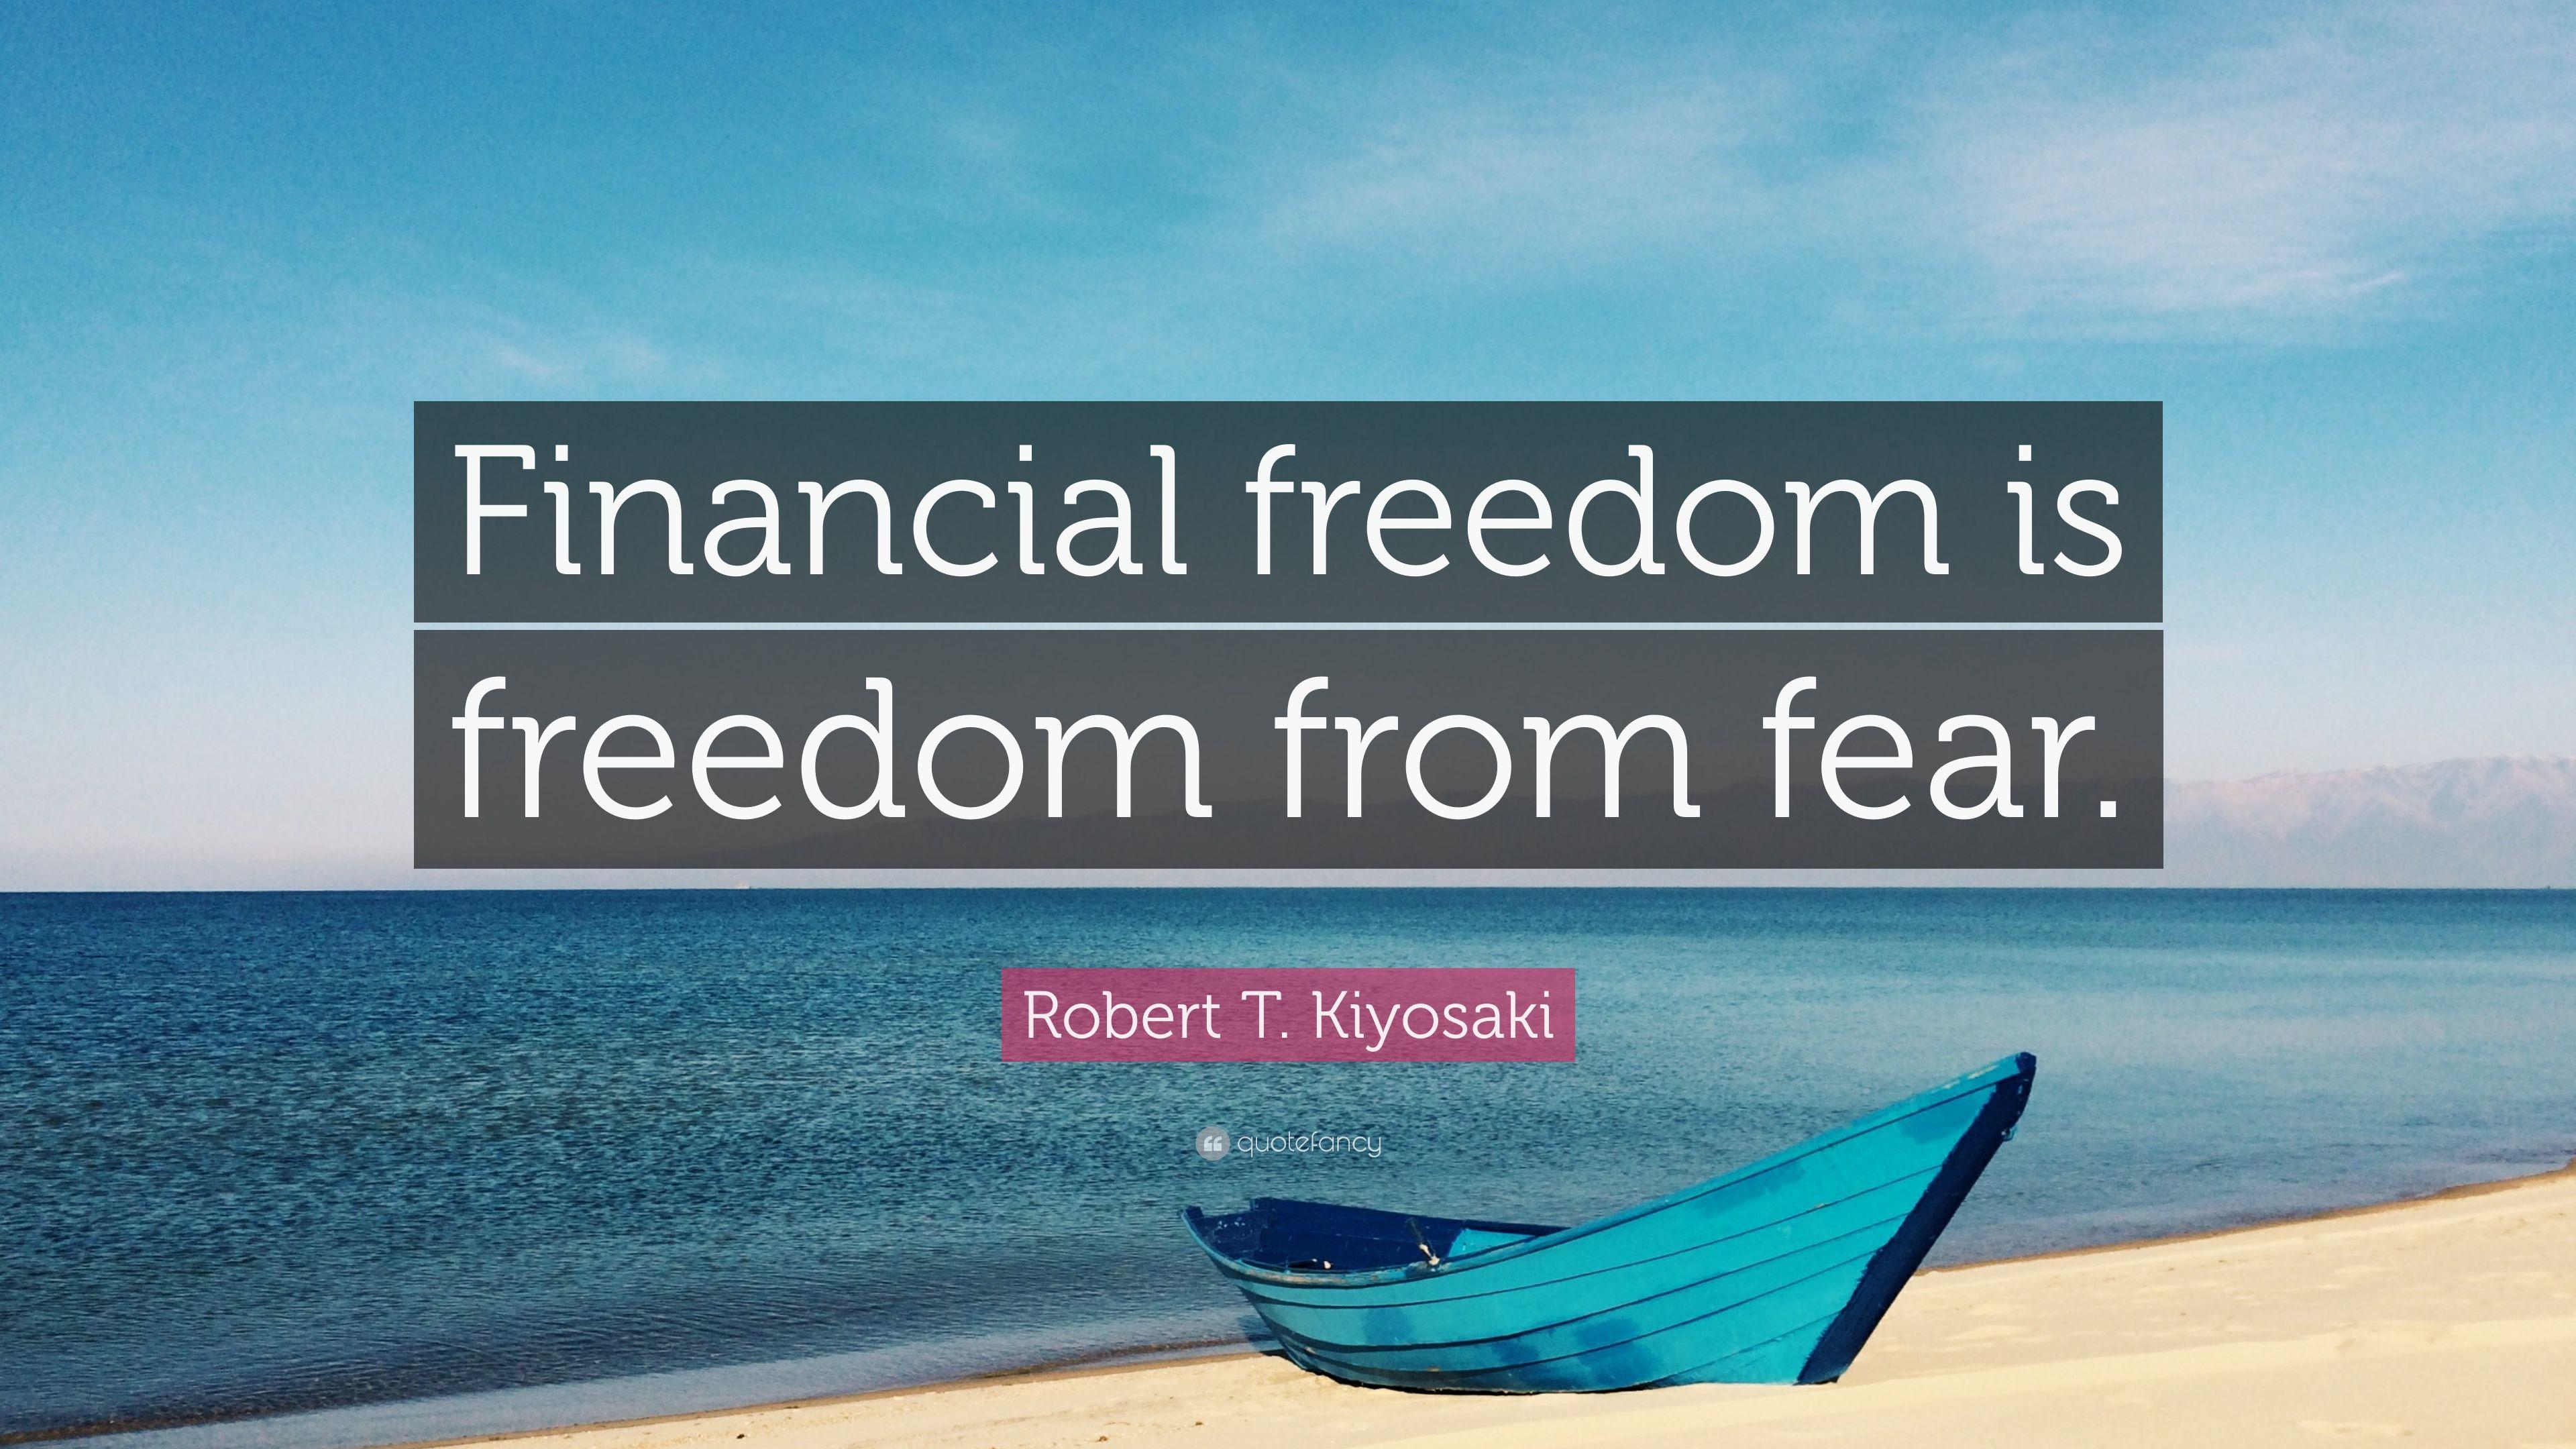 Robert T. Kiyosaki Quote: “Financial freedom is freedom from fear